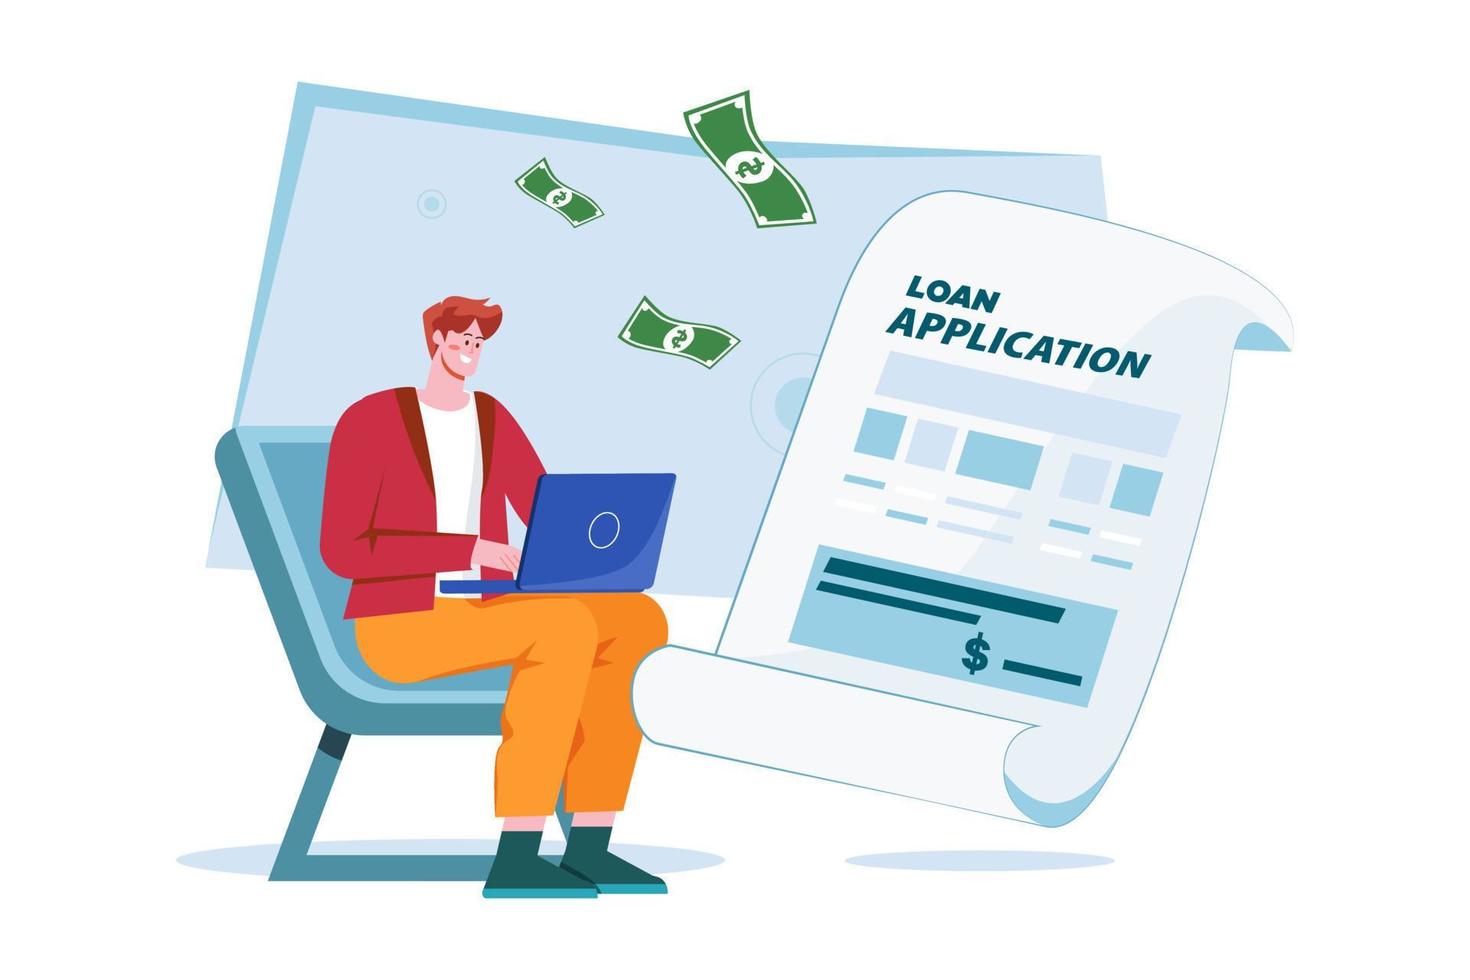 Man Applying For A Loan Using A Laptop Illustration concept on white background vector